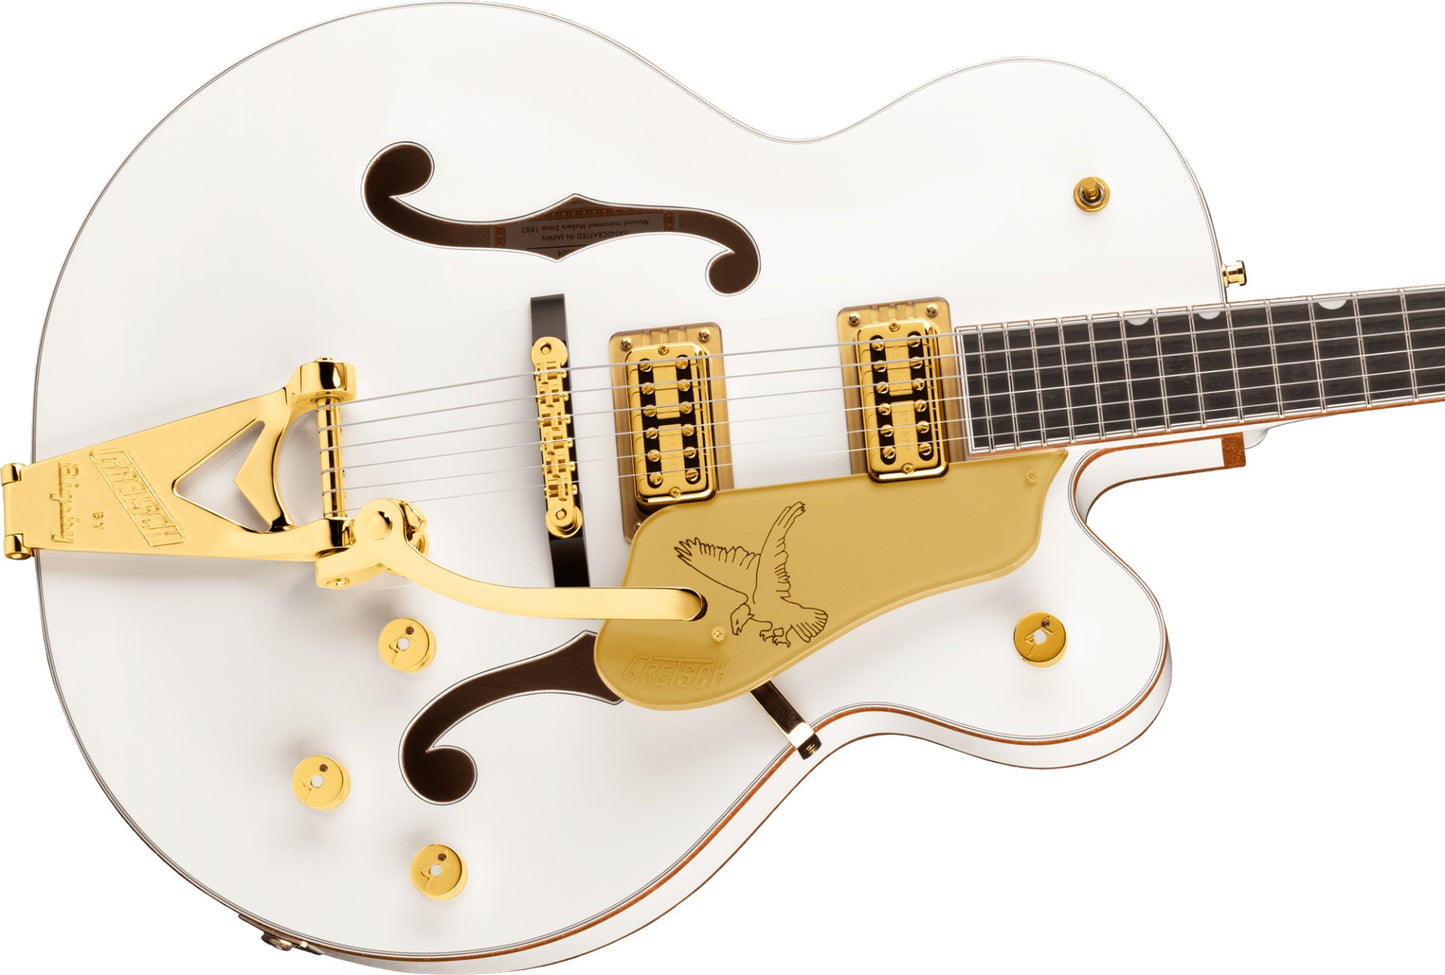 Gretsch G6136TG Players Edition Falcon Hollow Body Guitar - White